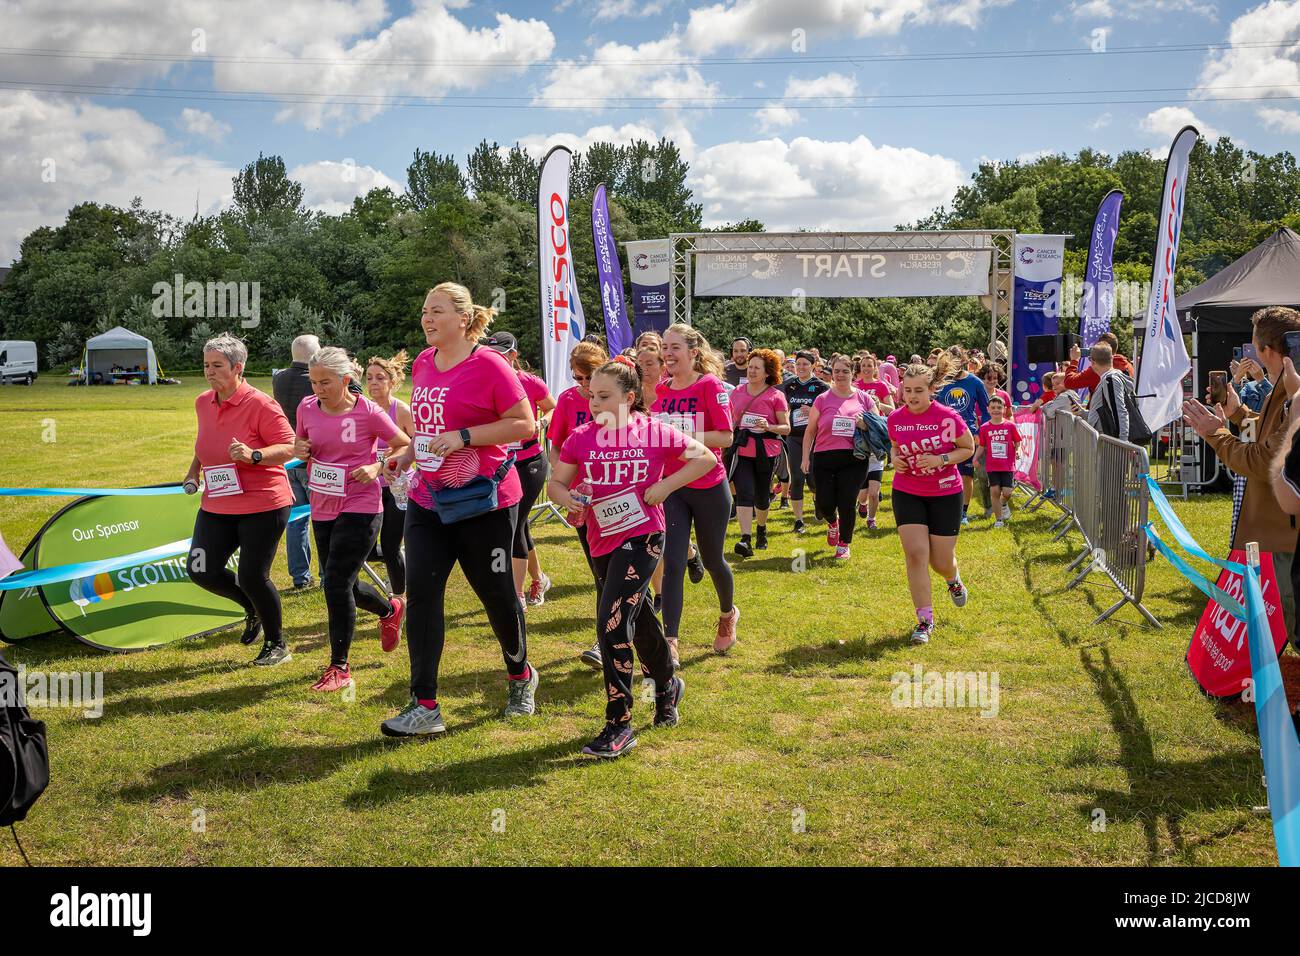 12 June 2022; Warrington Cheshire, UK; Race for Life in Victoria Park in aid of Cancer Research. The runners start the race Credit: John Hopkins/Alamy Live News Stock Photo